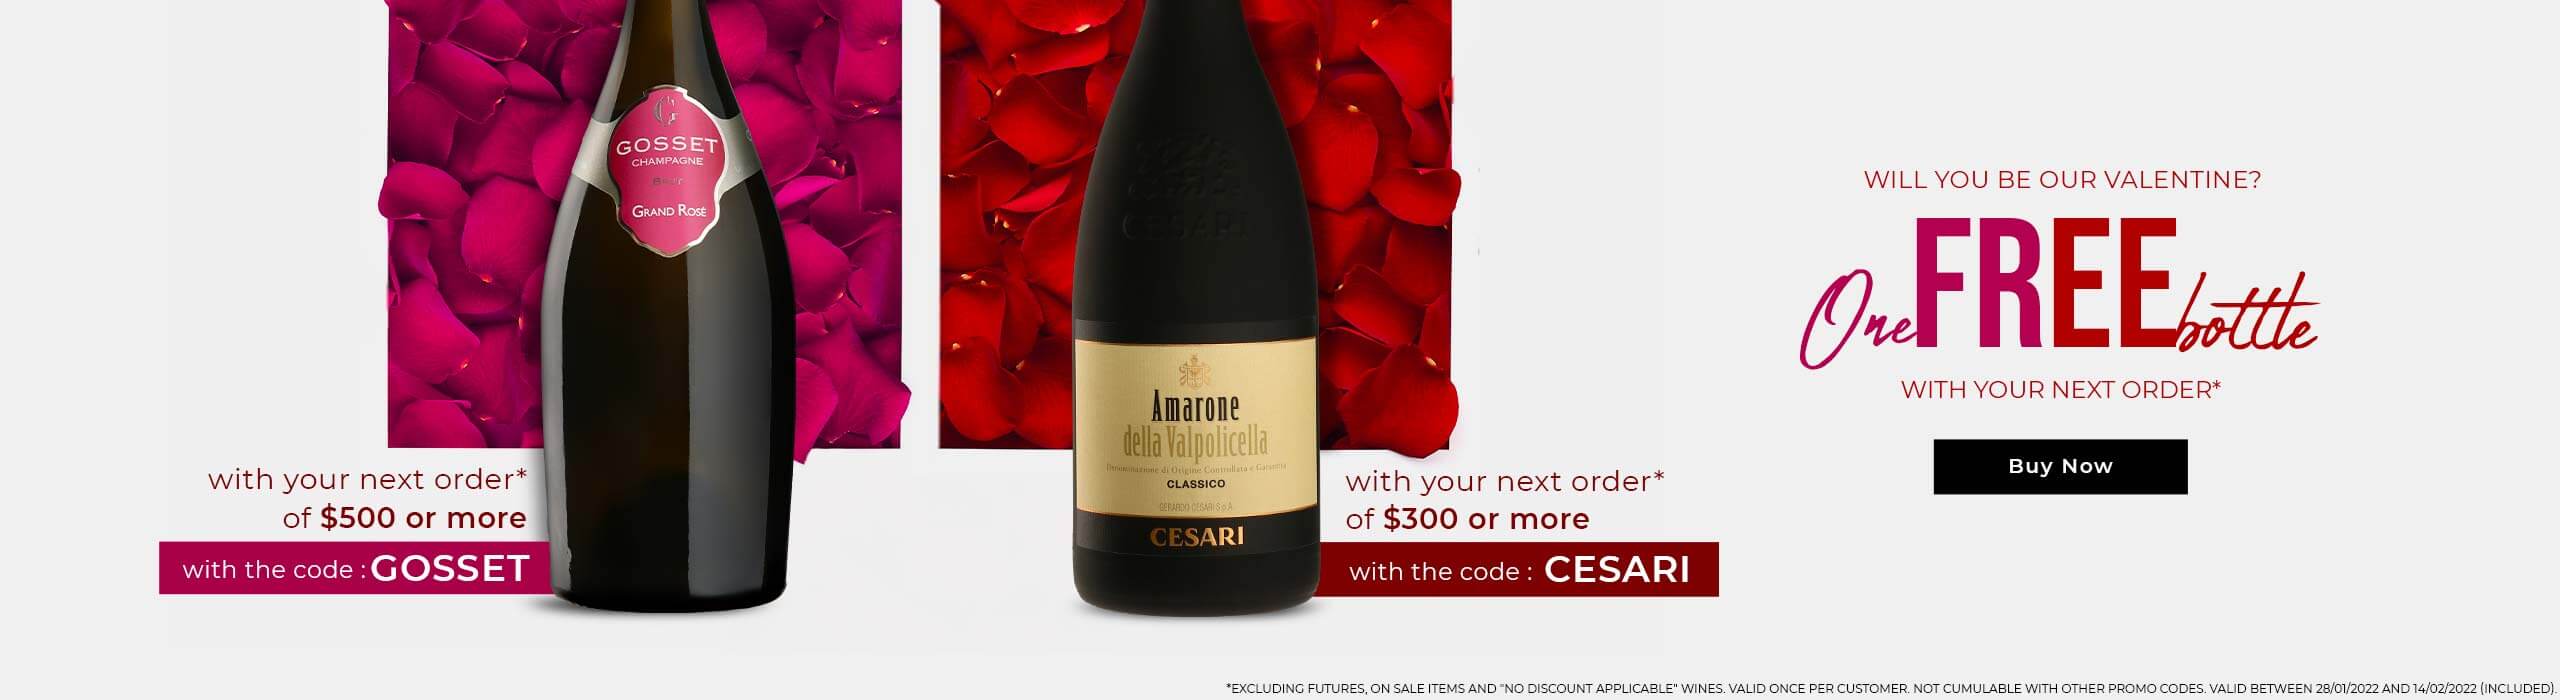 Enjoy a FREE Valentine's Day Gift with Your Next Purchase